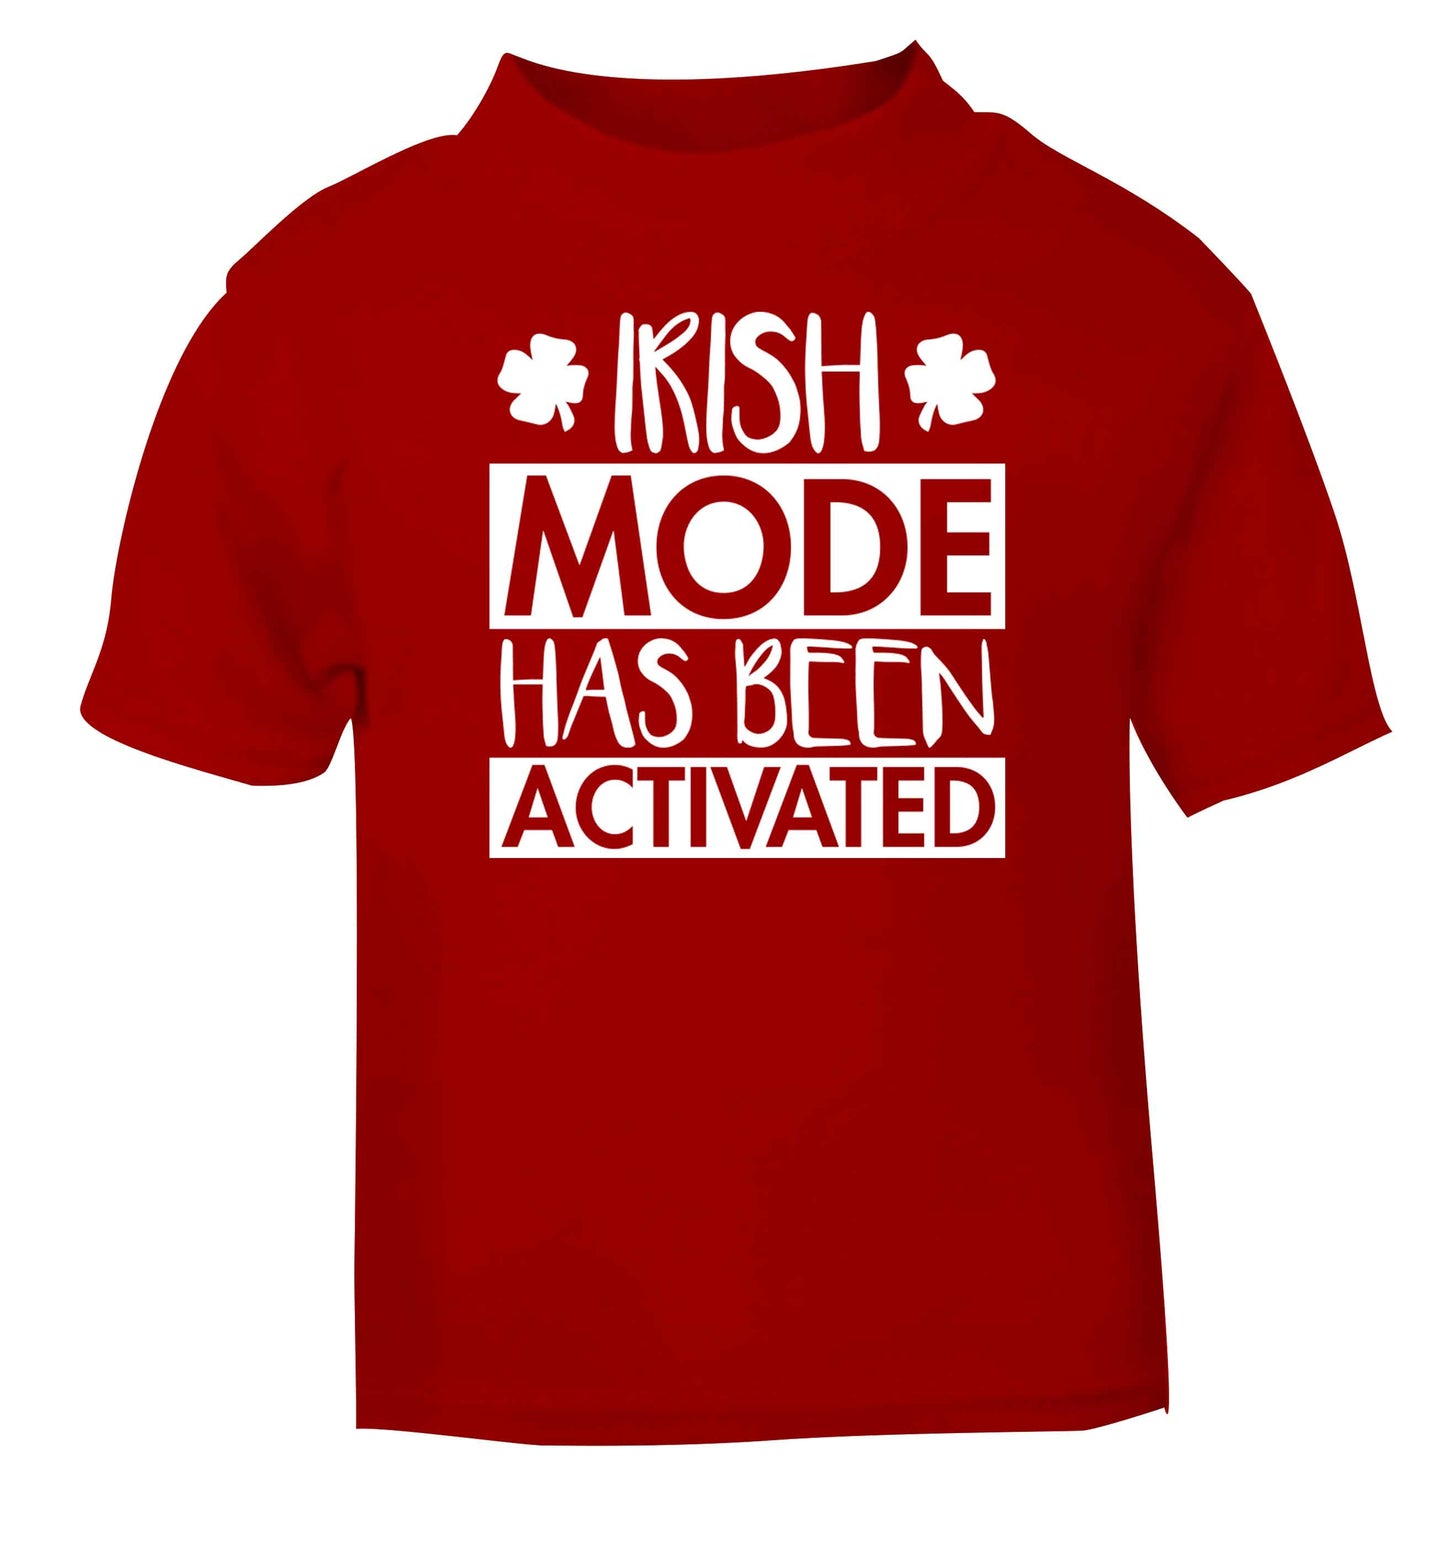 Irish mode has been activated red baby toddler Tshirt 2 Years